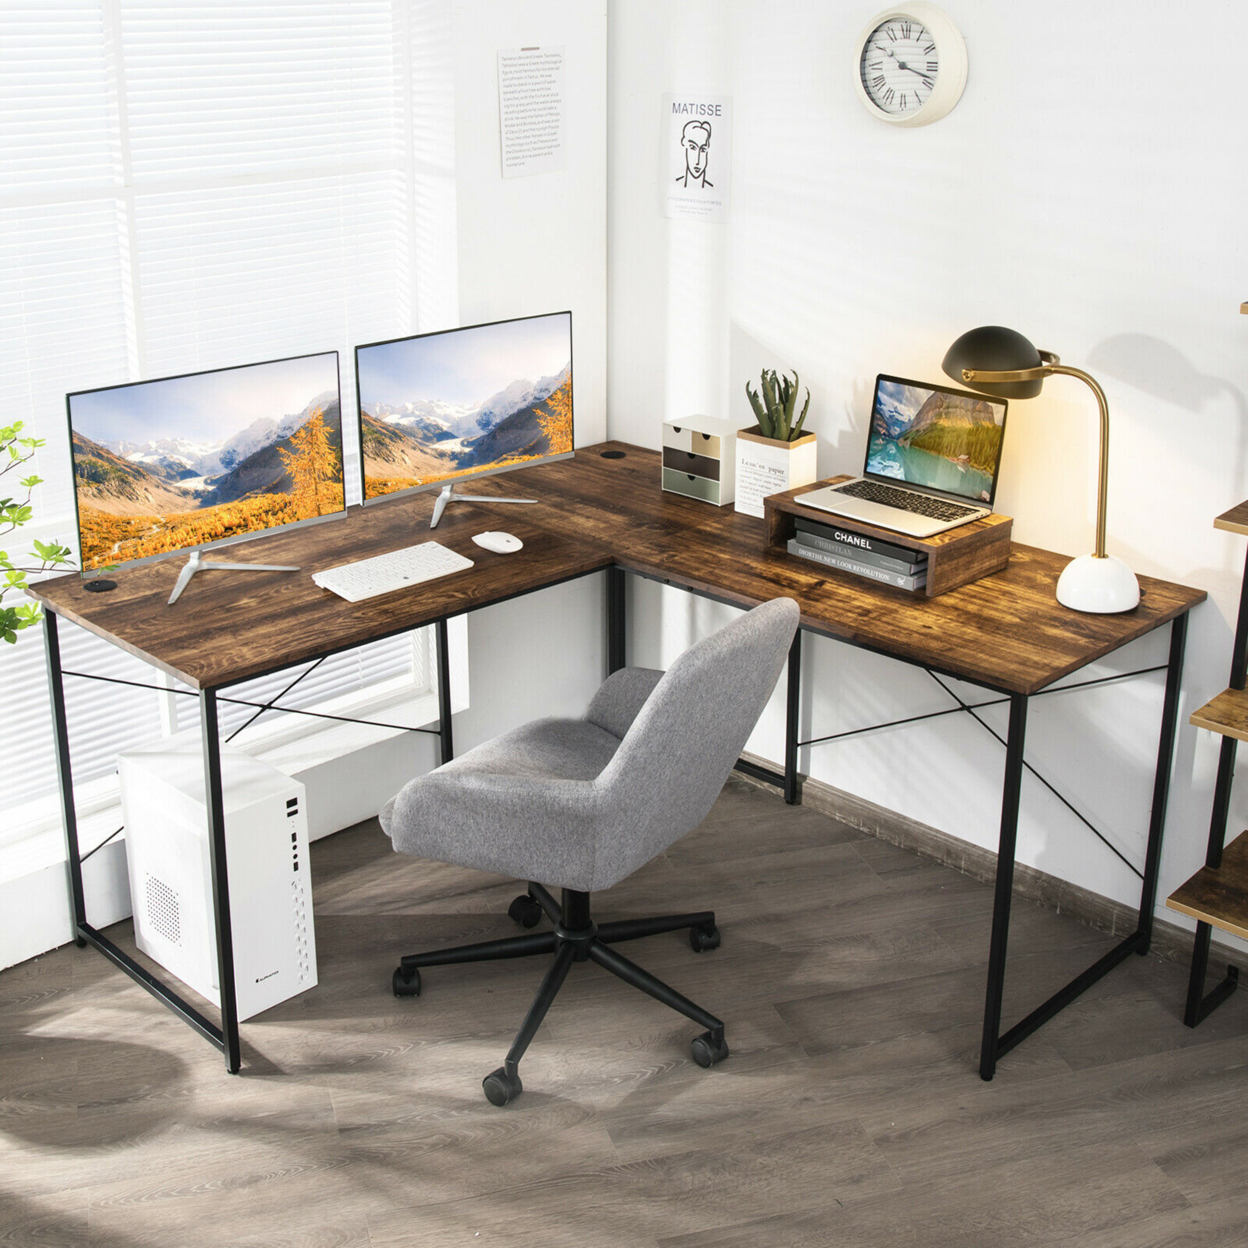 L-Shaped Reversible Computer Desk 2-Person Long Table W/Monitor Stand - Black